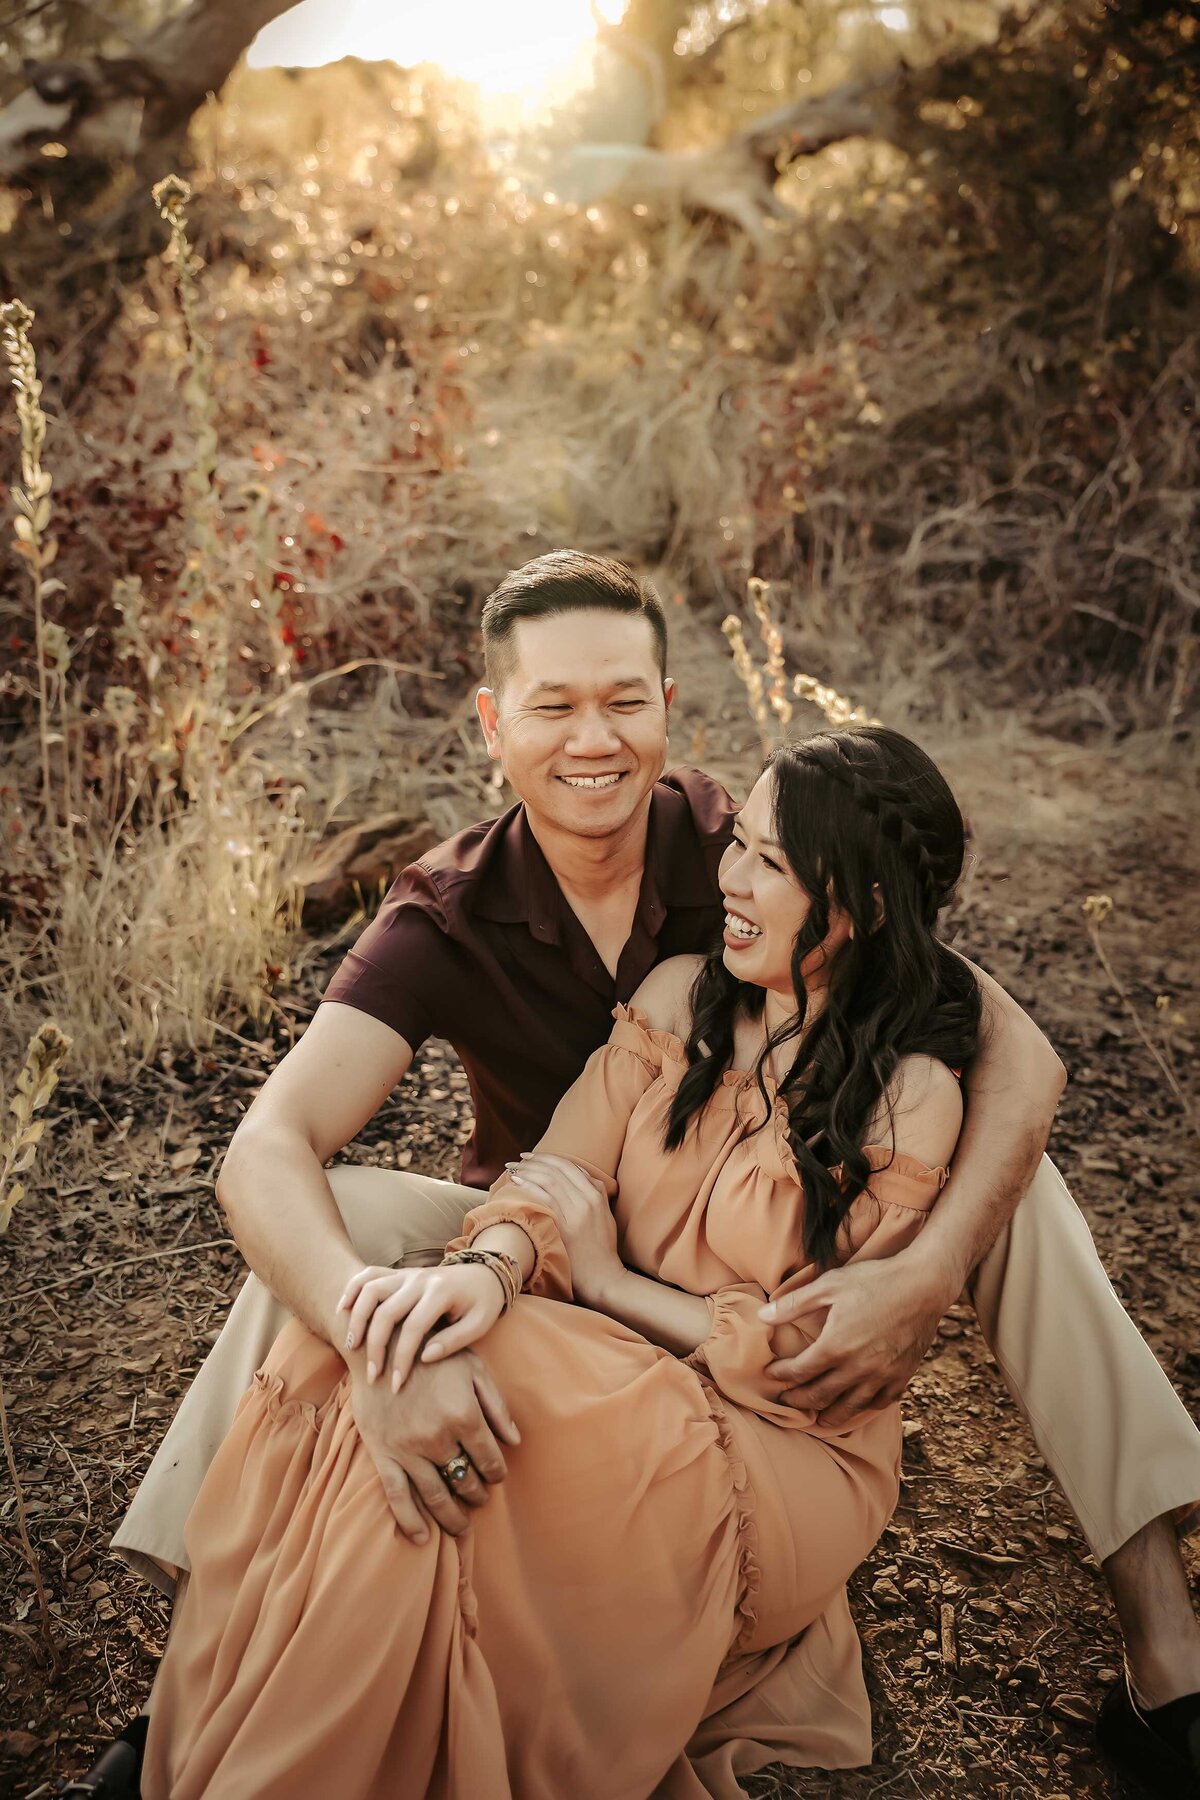 a man is sitting on the ground holding his wife in his arms while they laugh. She is wearing a light peach maxi dress and her hair is wavy.